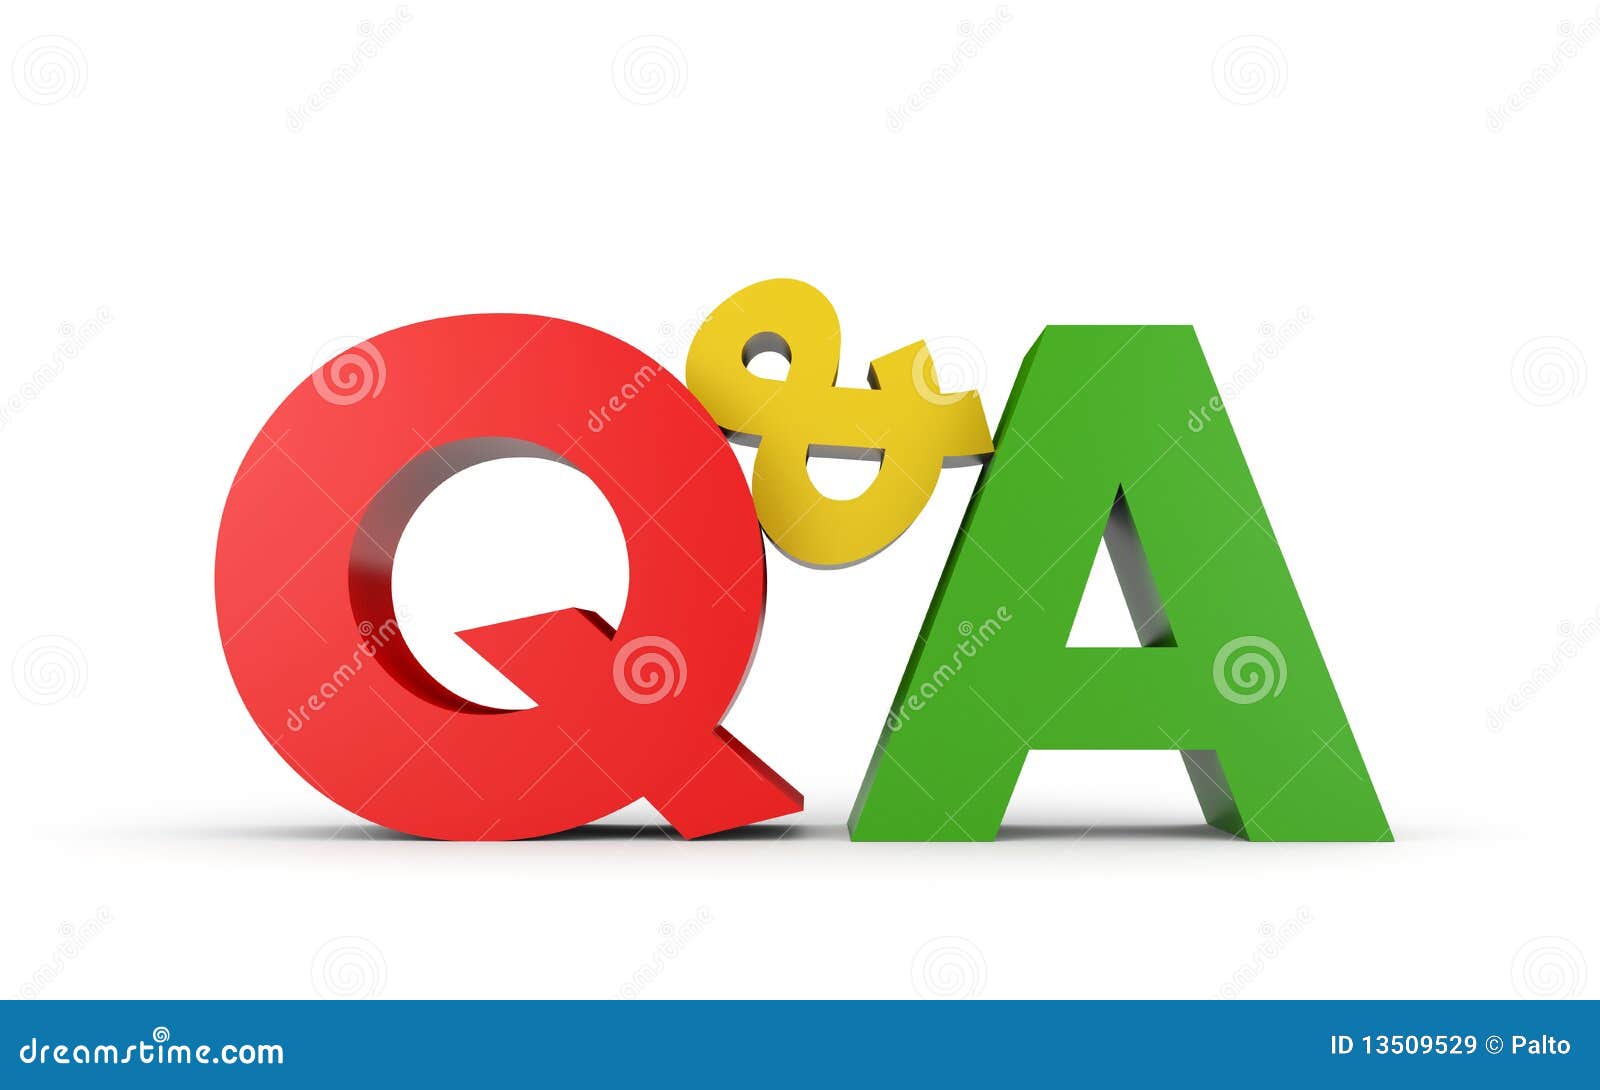 clipart for questions and answers - photo #10